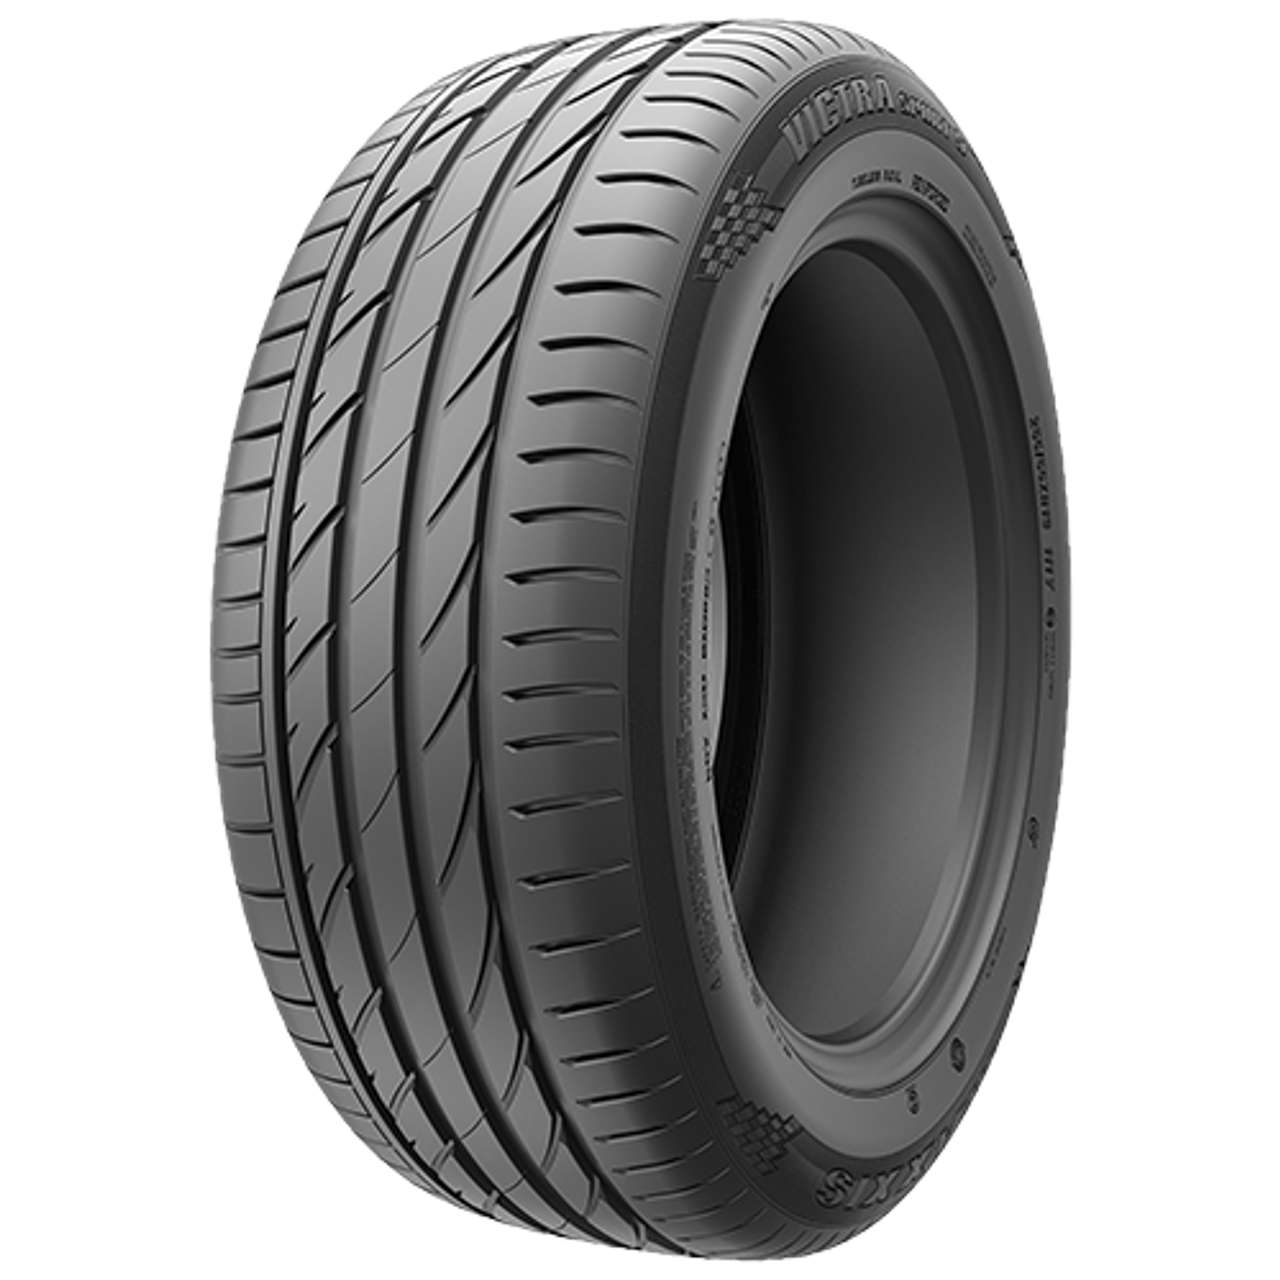 MAXXIS VICTRA SPORT 5 (VS5) 255/55ZR18 109Y BSW XL